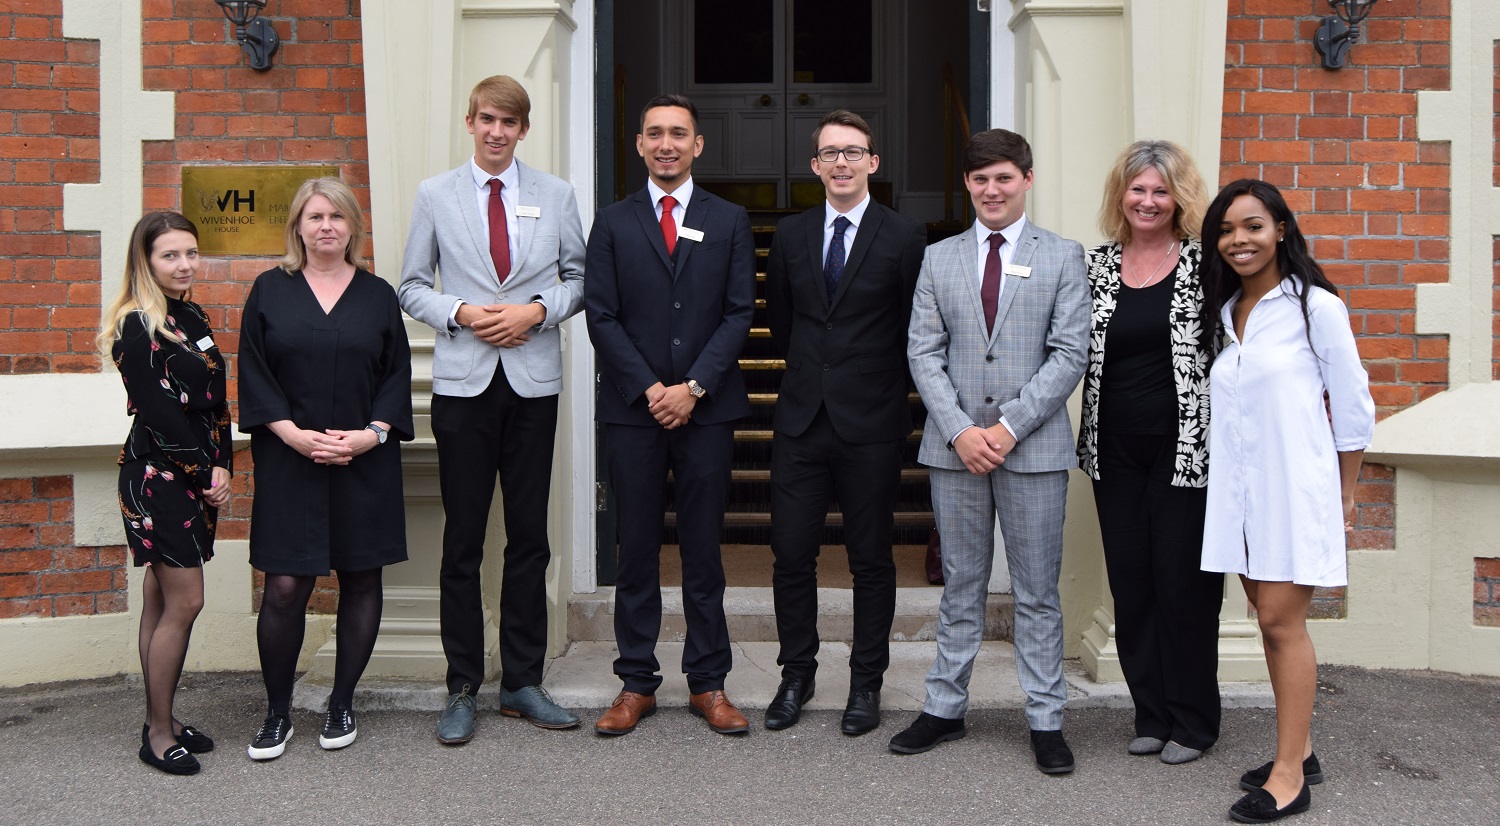 Students pose with some of our industry connections following a successful Consultancy Project presentation